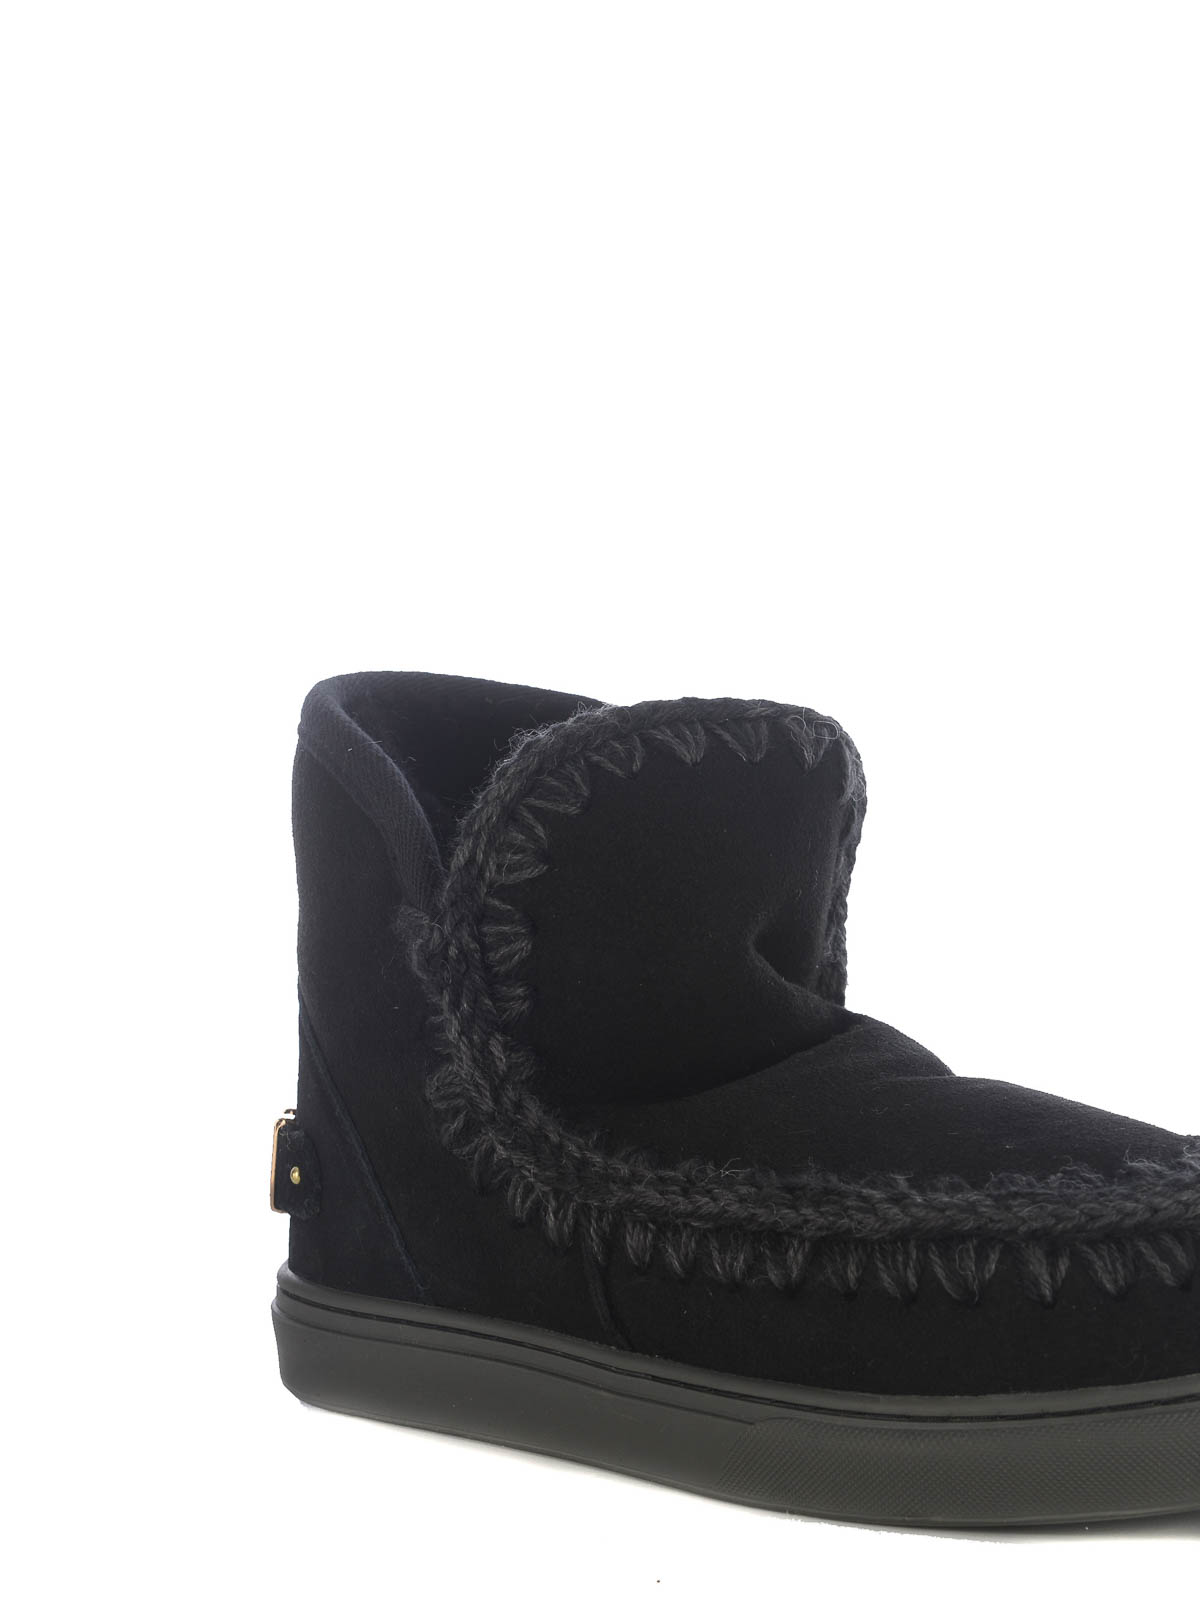 Shop Mou Ankle Boots   Made Of Leather In Black